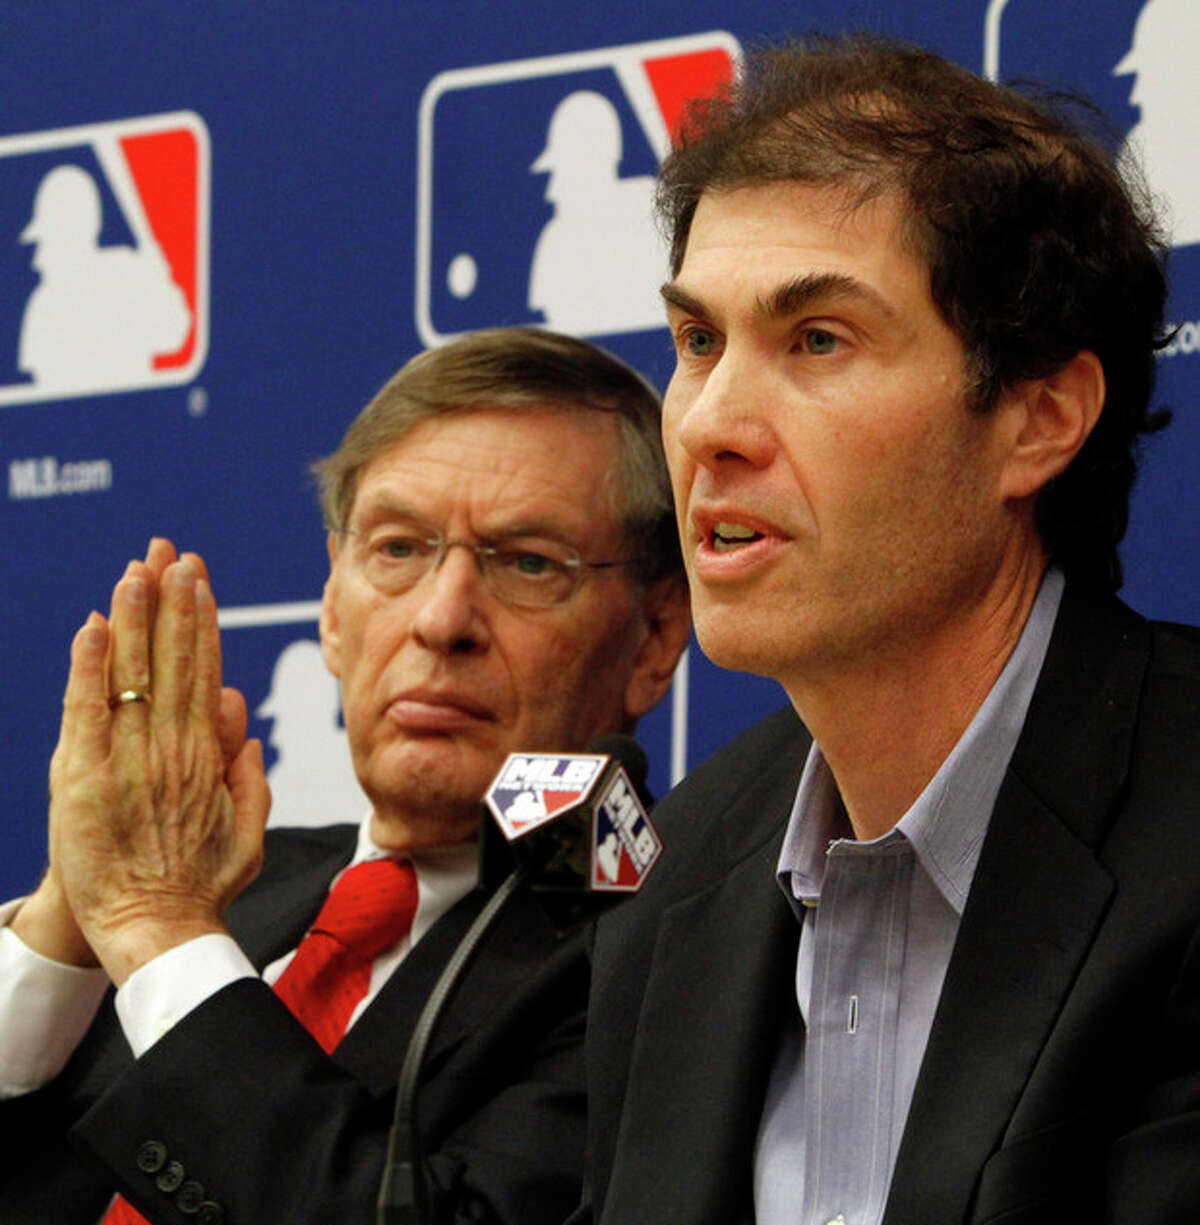 FILE - In this Nov. 22, 2011, file photo, Major League Baseball Commissioner Bud Selig, left, and MLB Players Association Executive Director Michael Weiner hold a news conference announcing a five-year collective bargaining agreement in New York. Weiner, the plain-speaking, ever-positive labor lawyer who took over as head of the powerful baseball players' union four years ago and smoothed the group's perennially contentious relationship with management, died Thursday, Nov. 21, 2013, 15 months after announcing he had been diagnosed with an inoperable brain tumor. He was 51. (AP Photo/Bebeto Matthews, File)